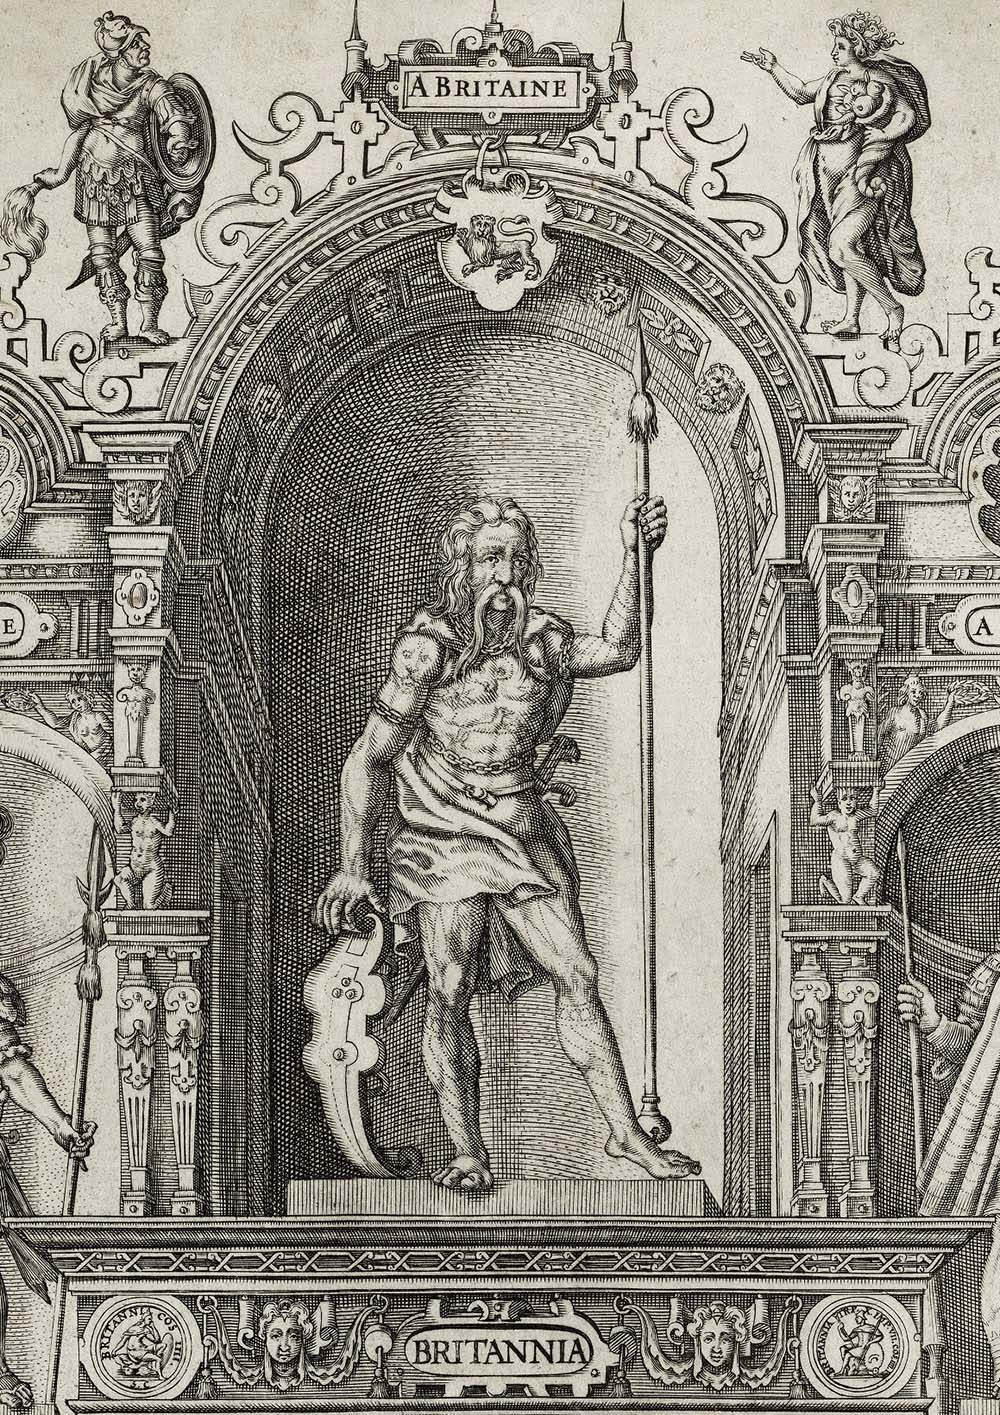 An ancient Briton depicted with tattoos of animals and geometric patterns, from the frontispiece in John Speed’s The History of Great Britain, 1614.